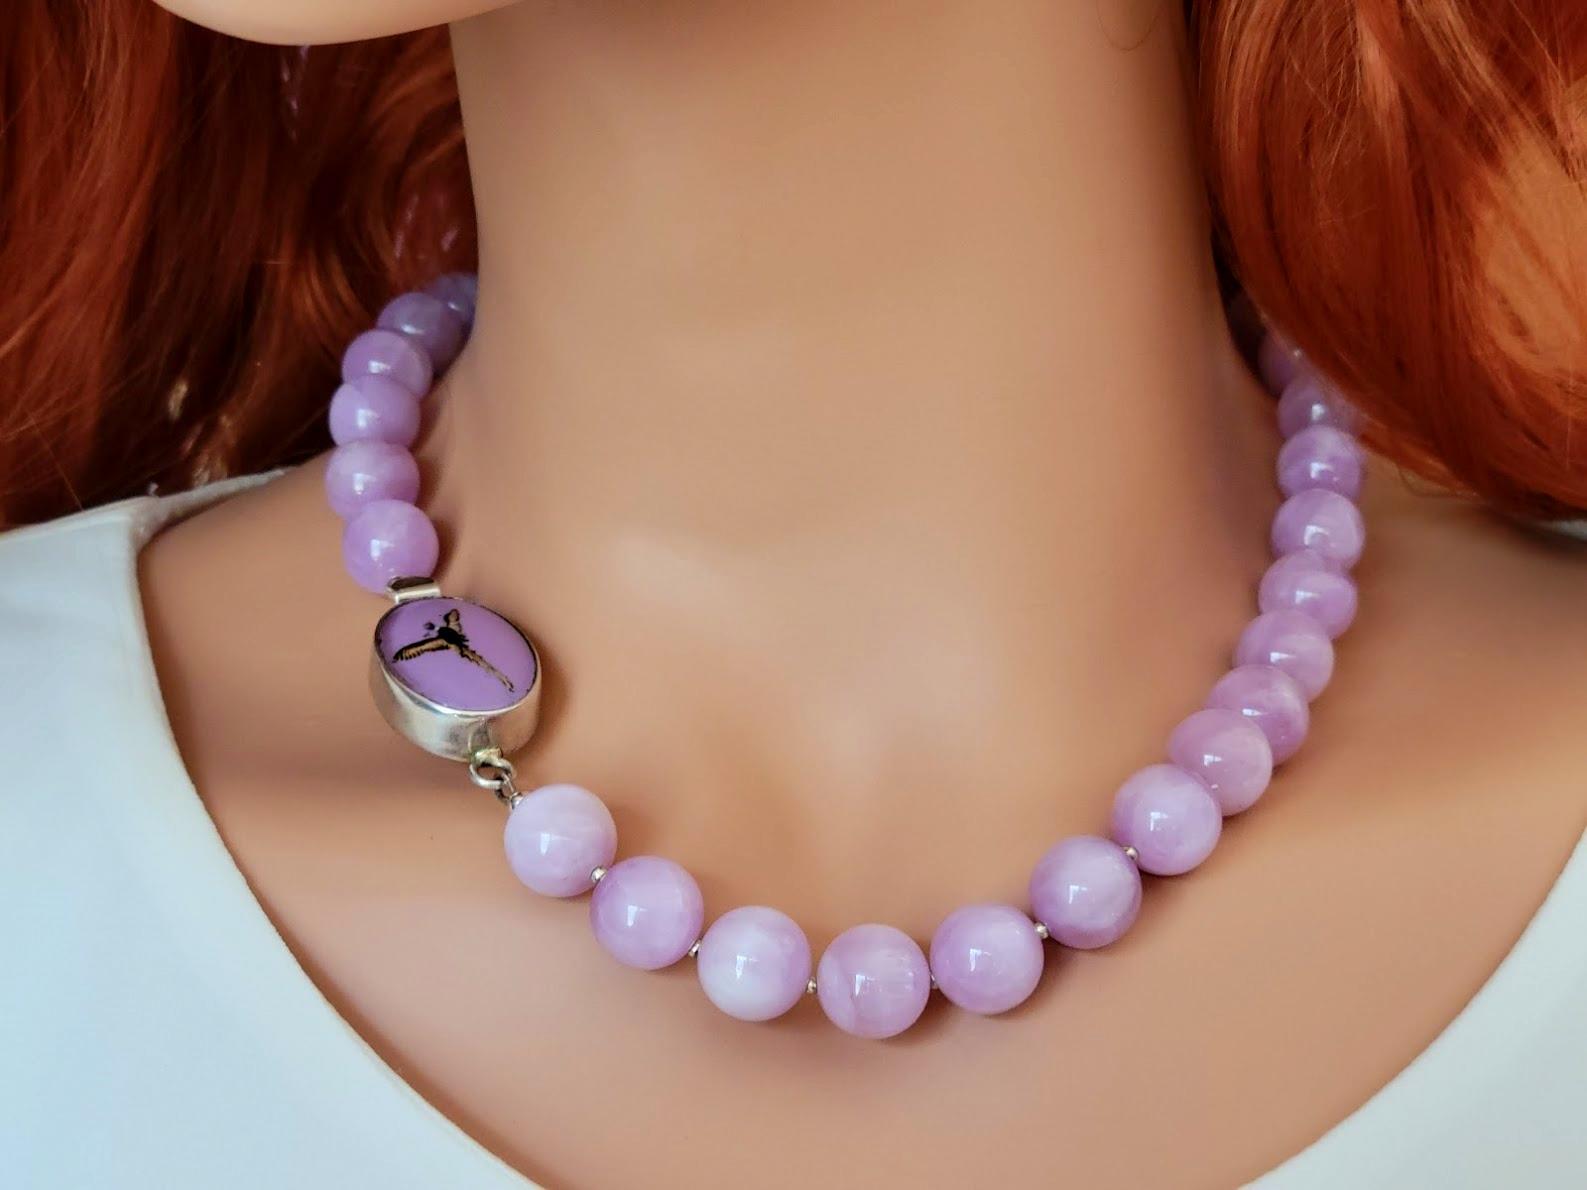 Lavender Chatoyant Kunzite Necklace With Vintage Painted Glass Essex Crystal Clasp.

The length of the necklace is 18.5 inches (47 cm). The size of the smooth round beads is 12.5 mm.
The color of the beads is a soft lavender with a slight cat's eye